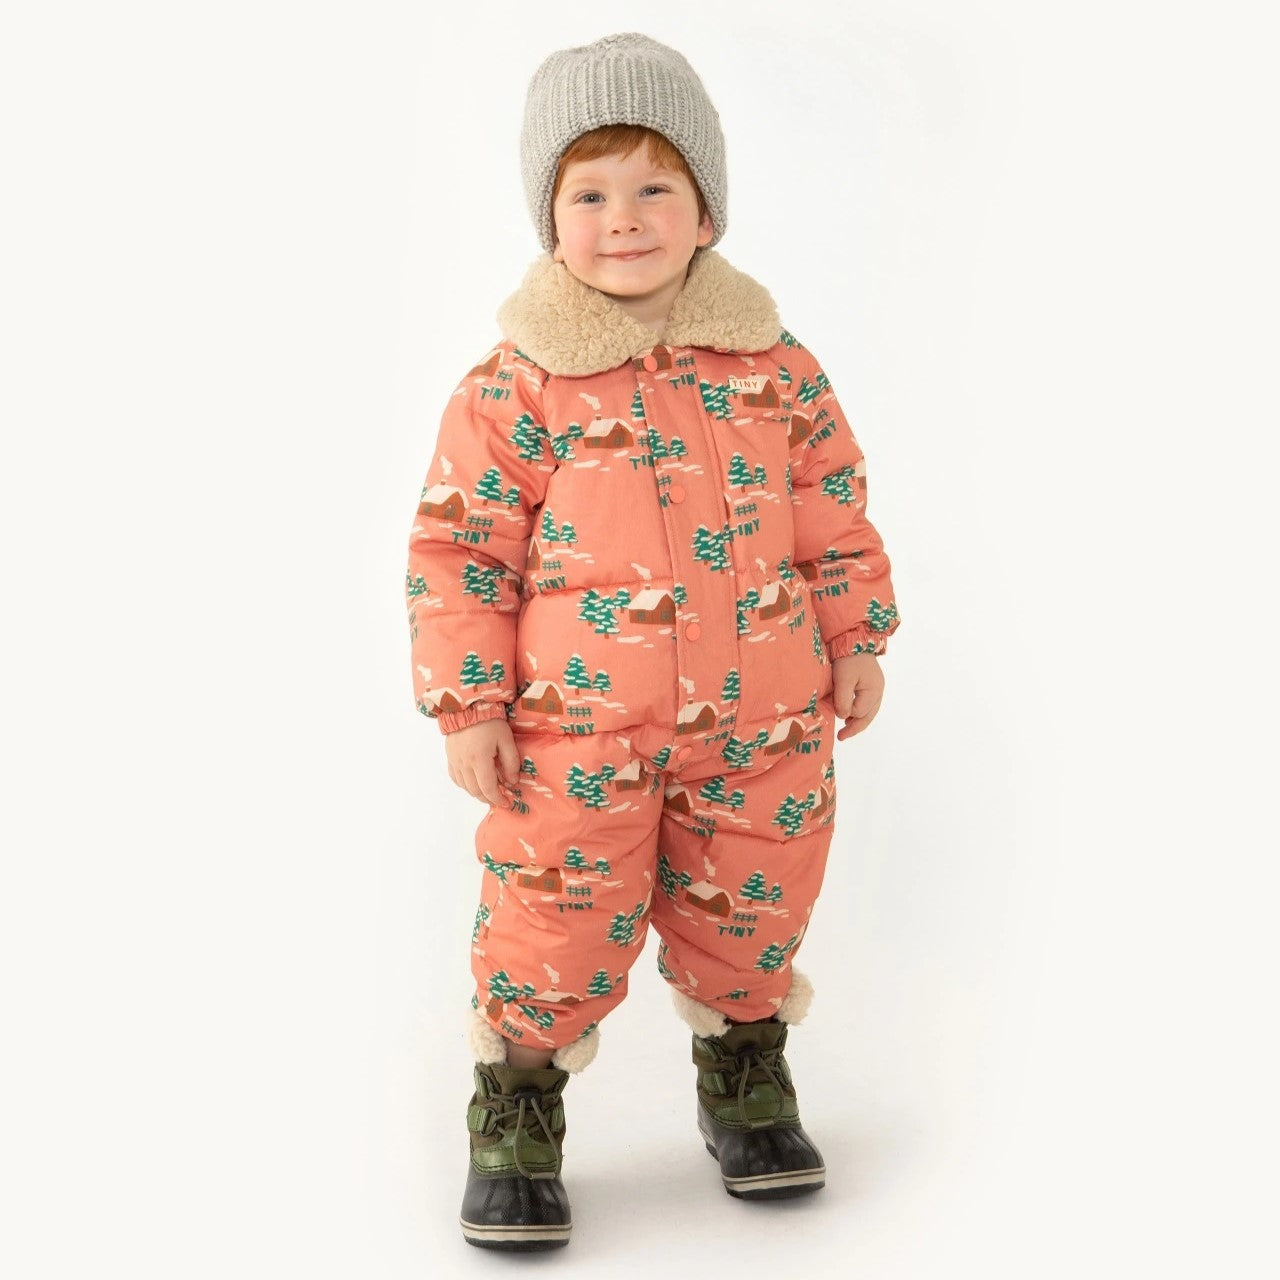 TINYCOTTONS Cottage Padded Overall ALWAYS SHOW